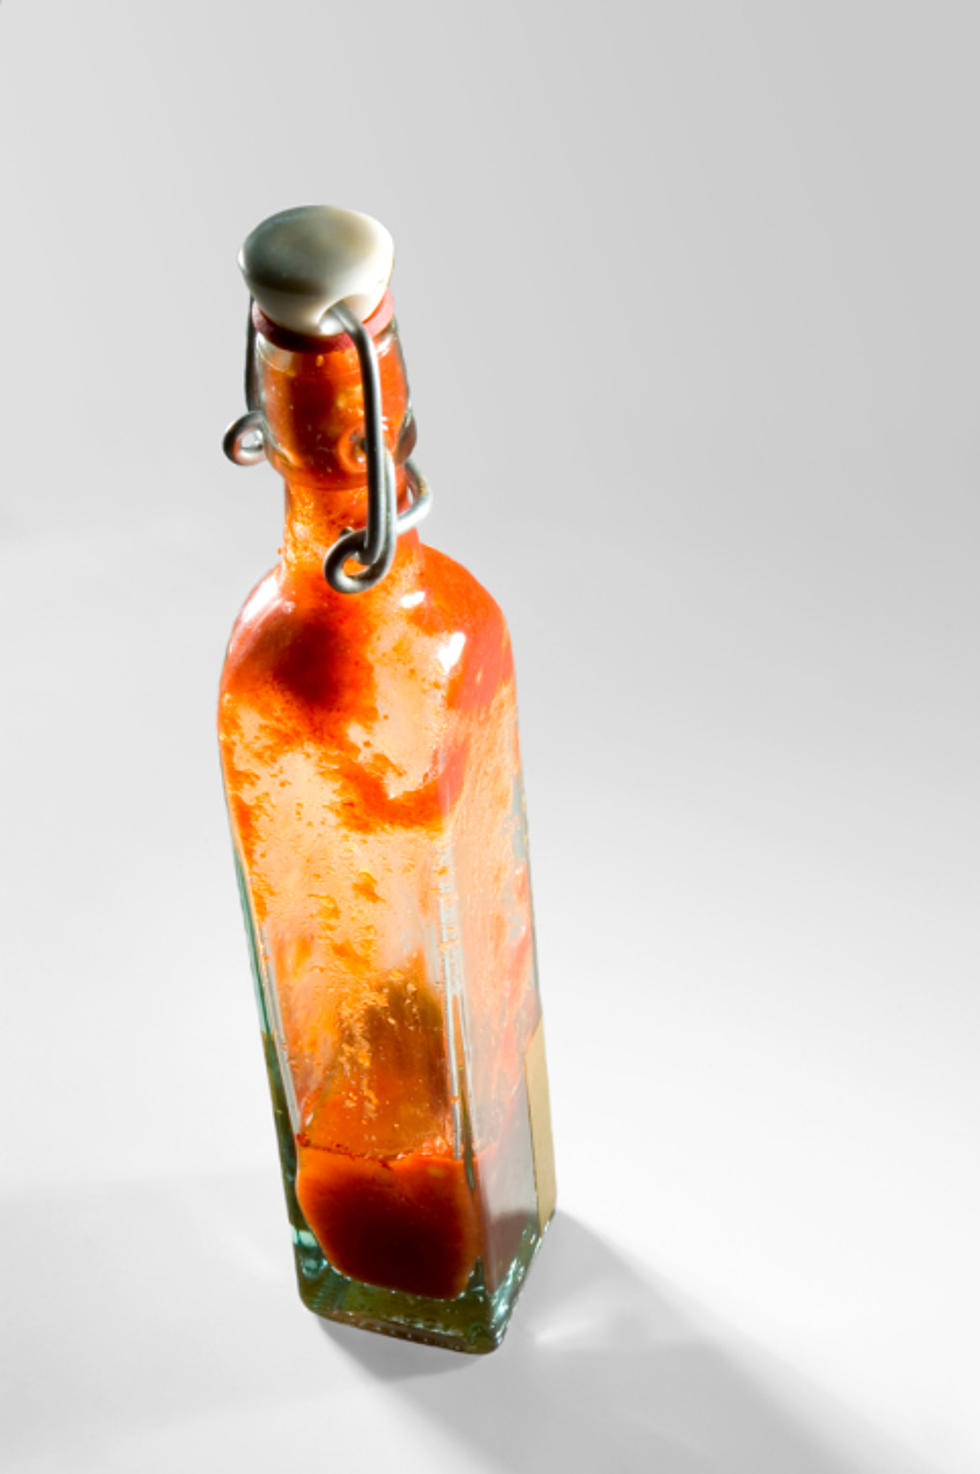 How to Evenly Apply Plenty of Hot Sauce to Your Favorite Dish